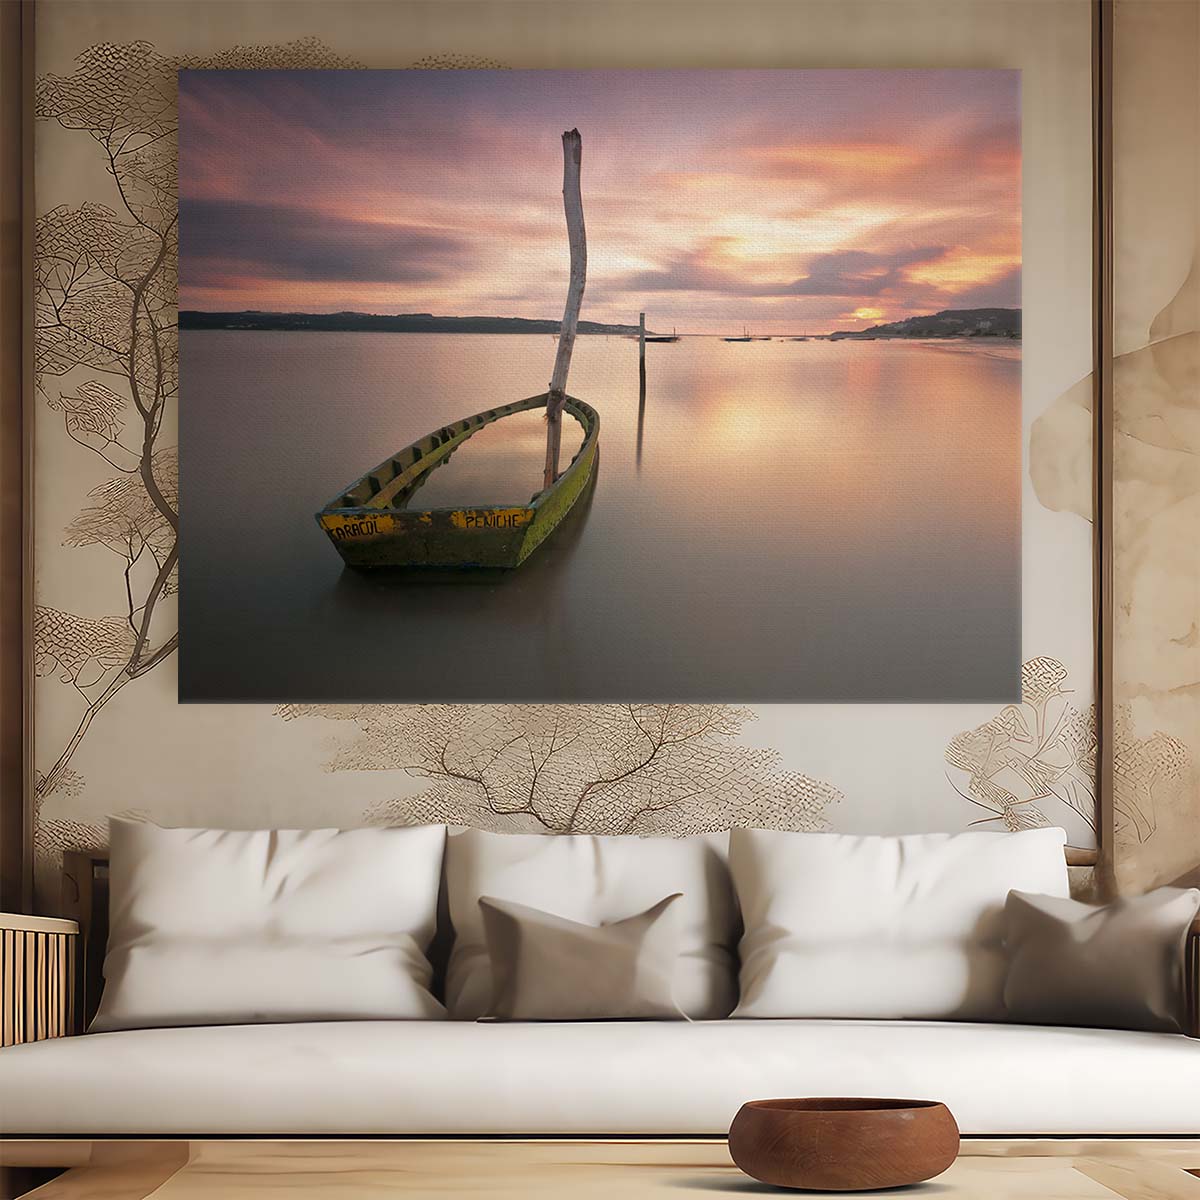 Serene Sunset Shipwreck Seascape Wall Art by Luxuriance Designs. Made in USA.